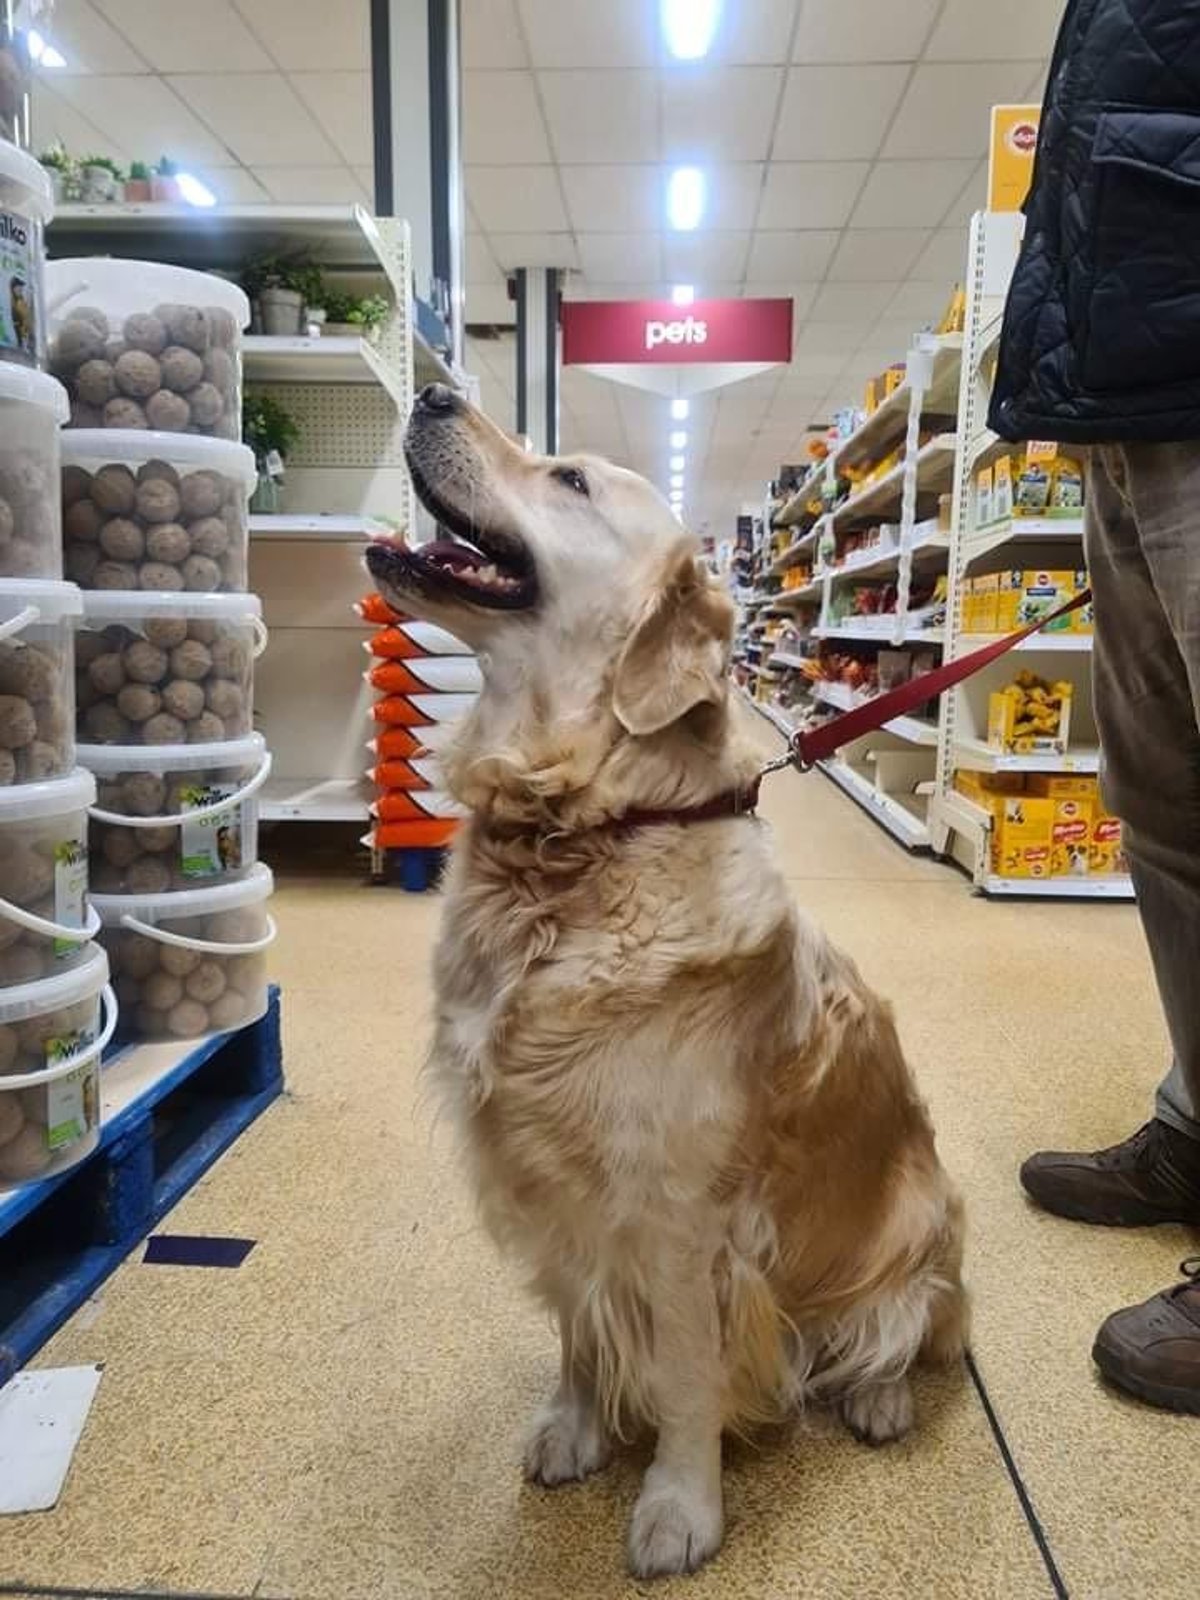 Full list: Wilko welcomes pets into hundreds of its stores - including  Sutton, but not in Mansfield | Mansfield and Ashfield Chad